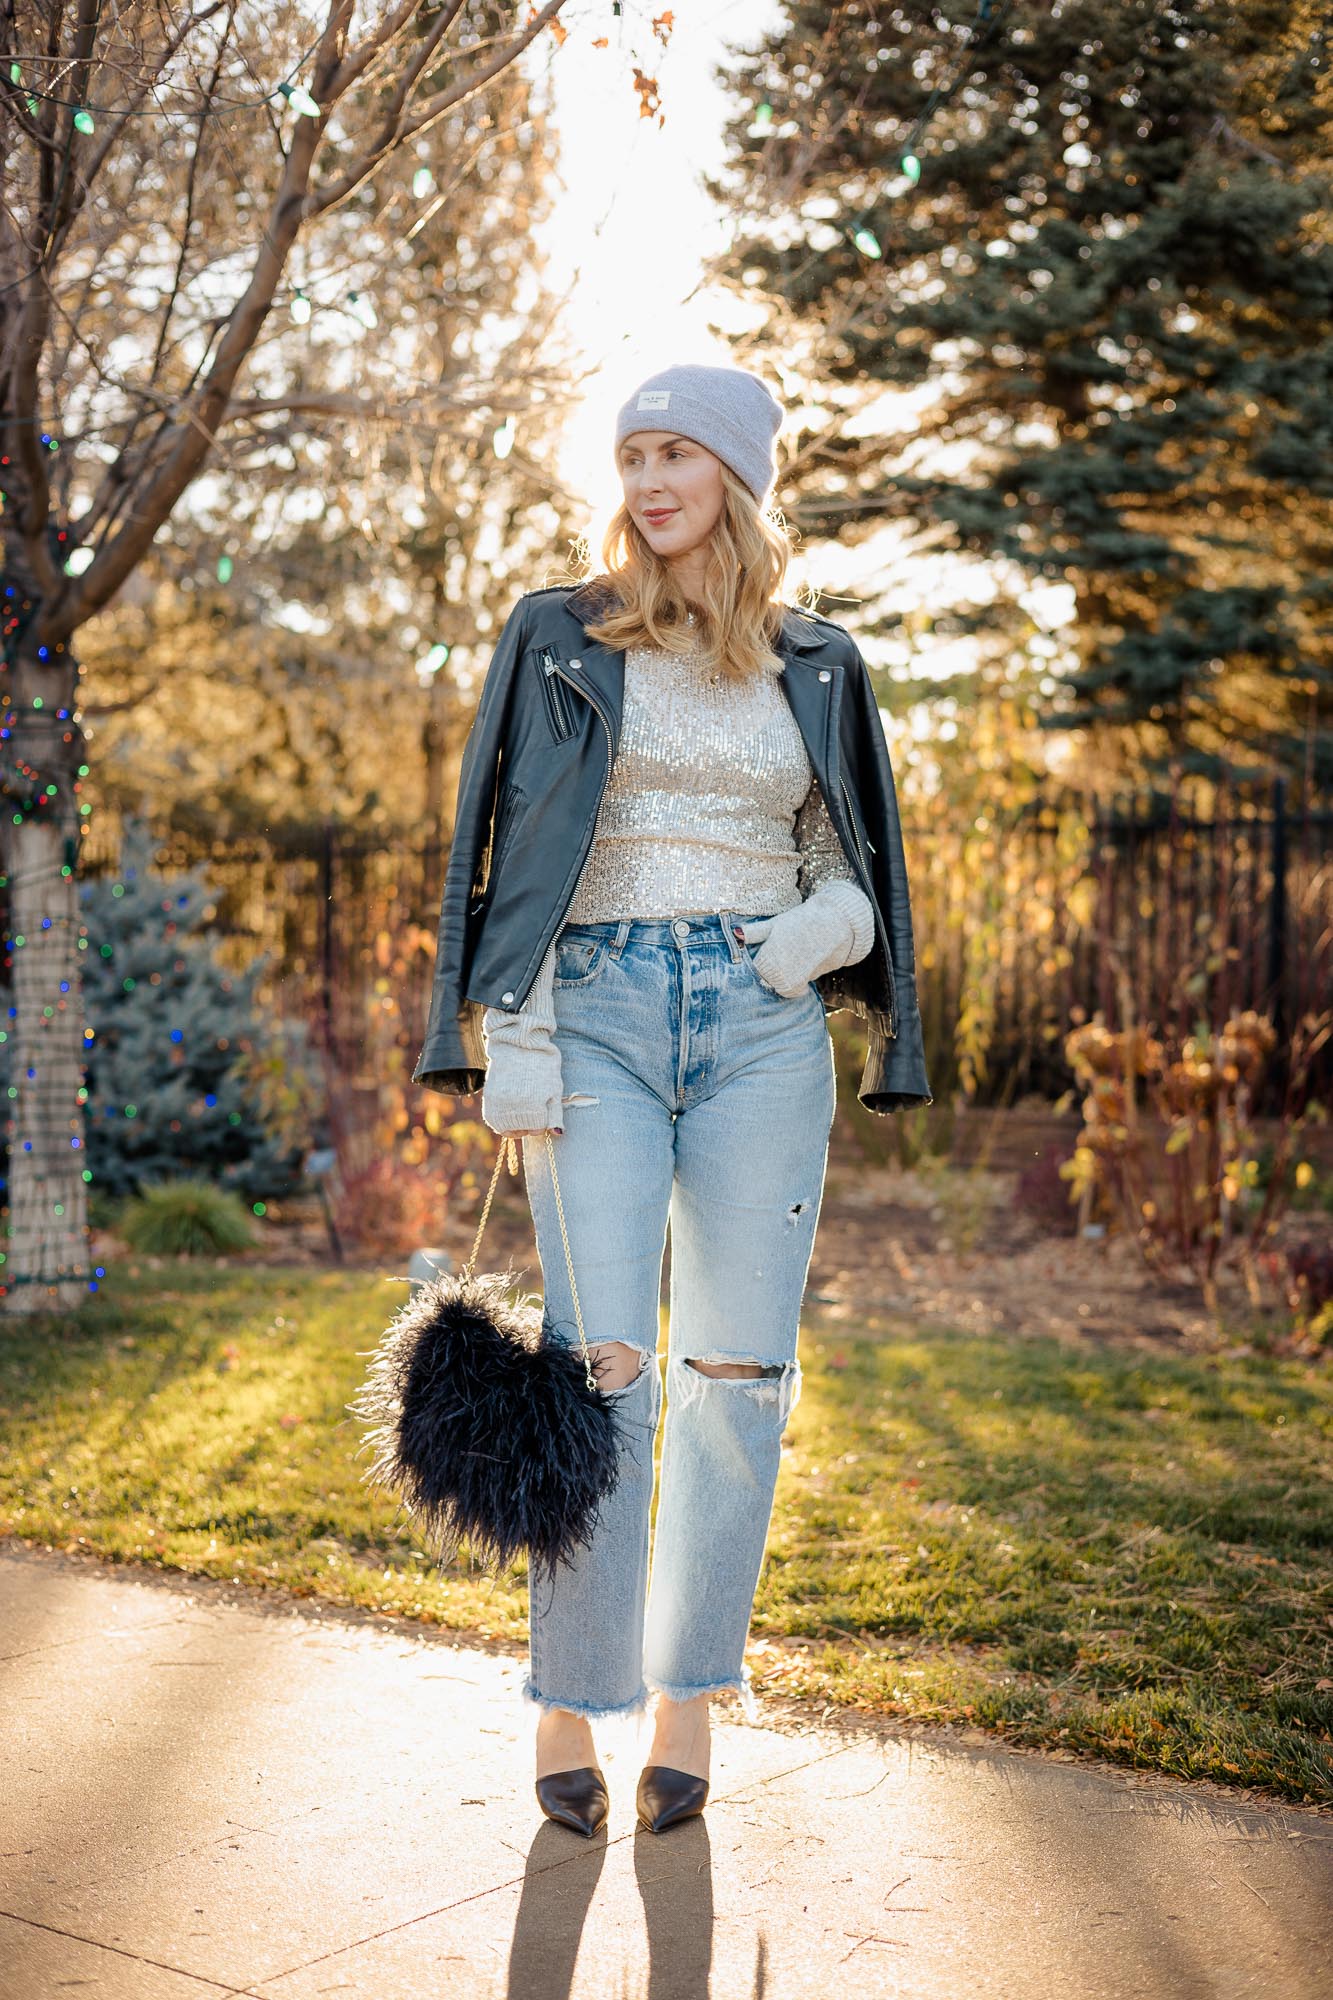 Wearing the free people sequin top in silver with Moussy Odessa jeans and a black Iro leather jacket.